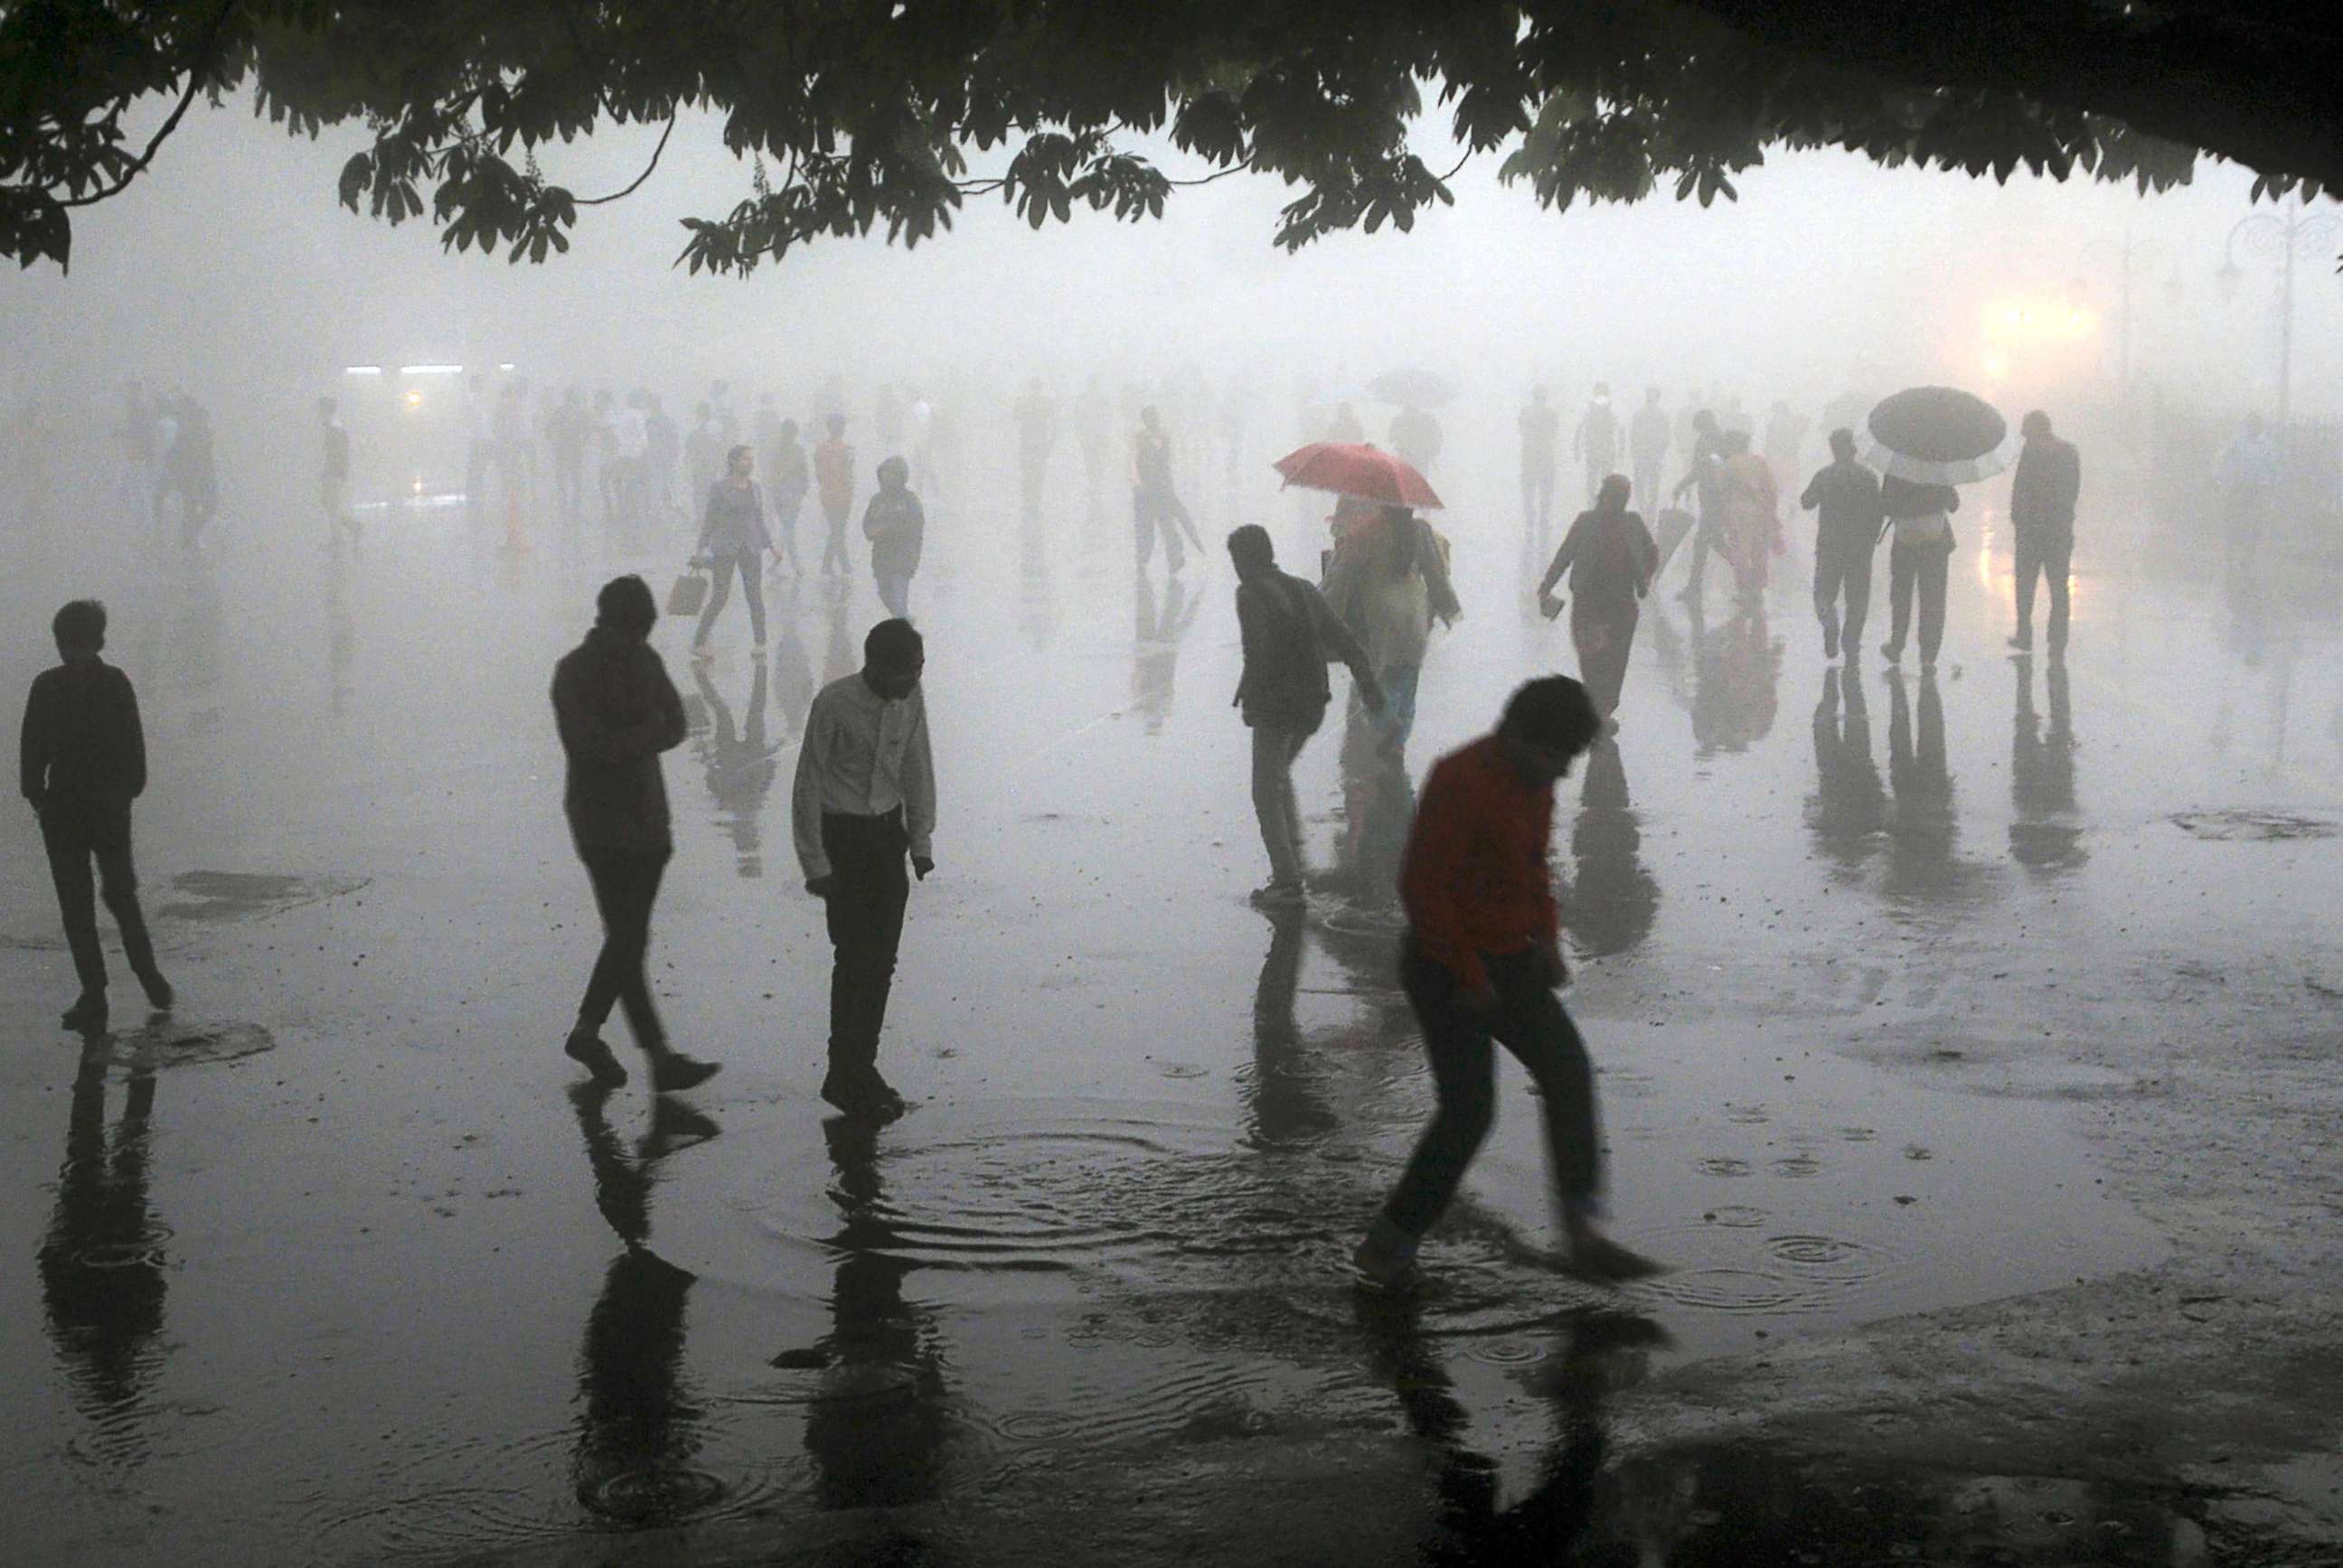 PHOTO: People walking under heavy rainfall in the northern hill town of Shimla in Himachal Pradesh state, India, May 2, 2018. 77 people were killed, 143 injured in powerful storms across northern India overnight on May 2-3, officials said.